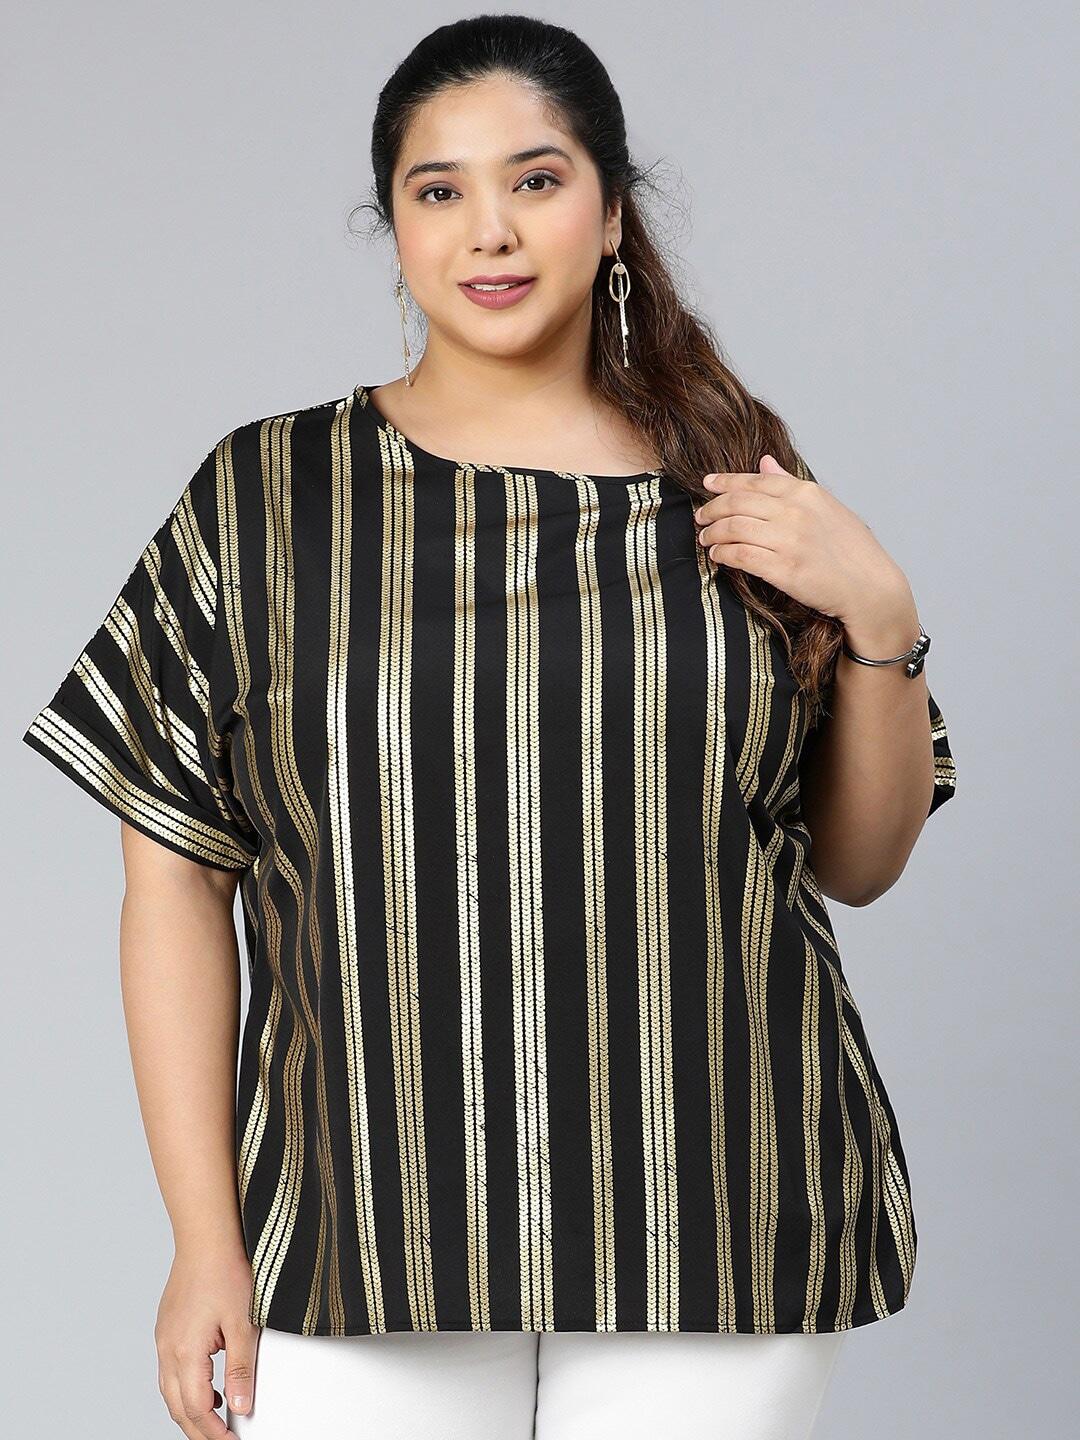 oxolloxo-plus-size-striped-extended-sleeves-crepe-top